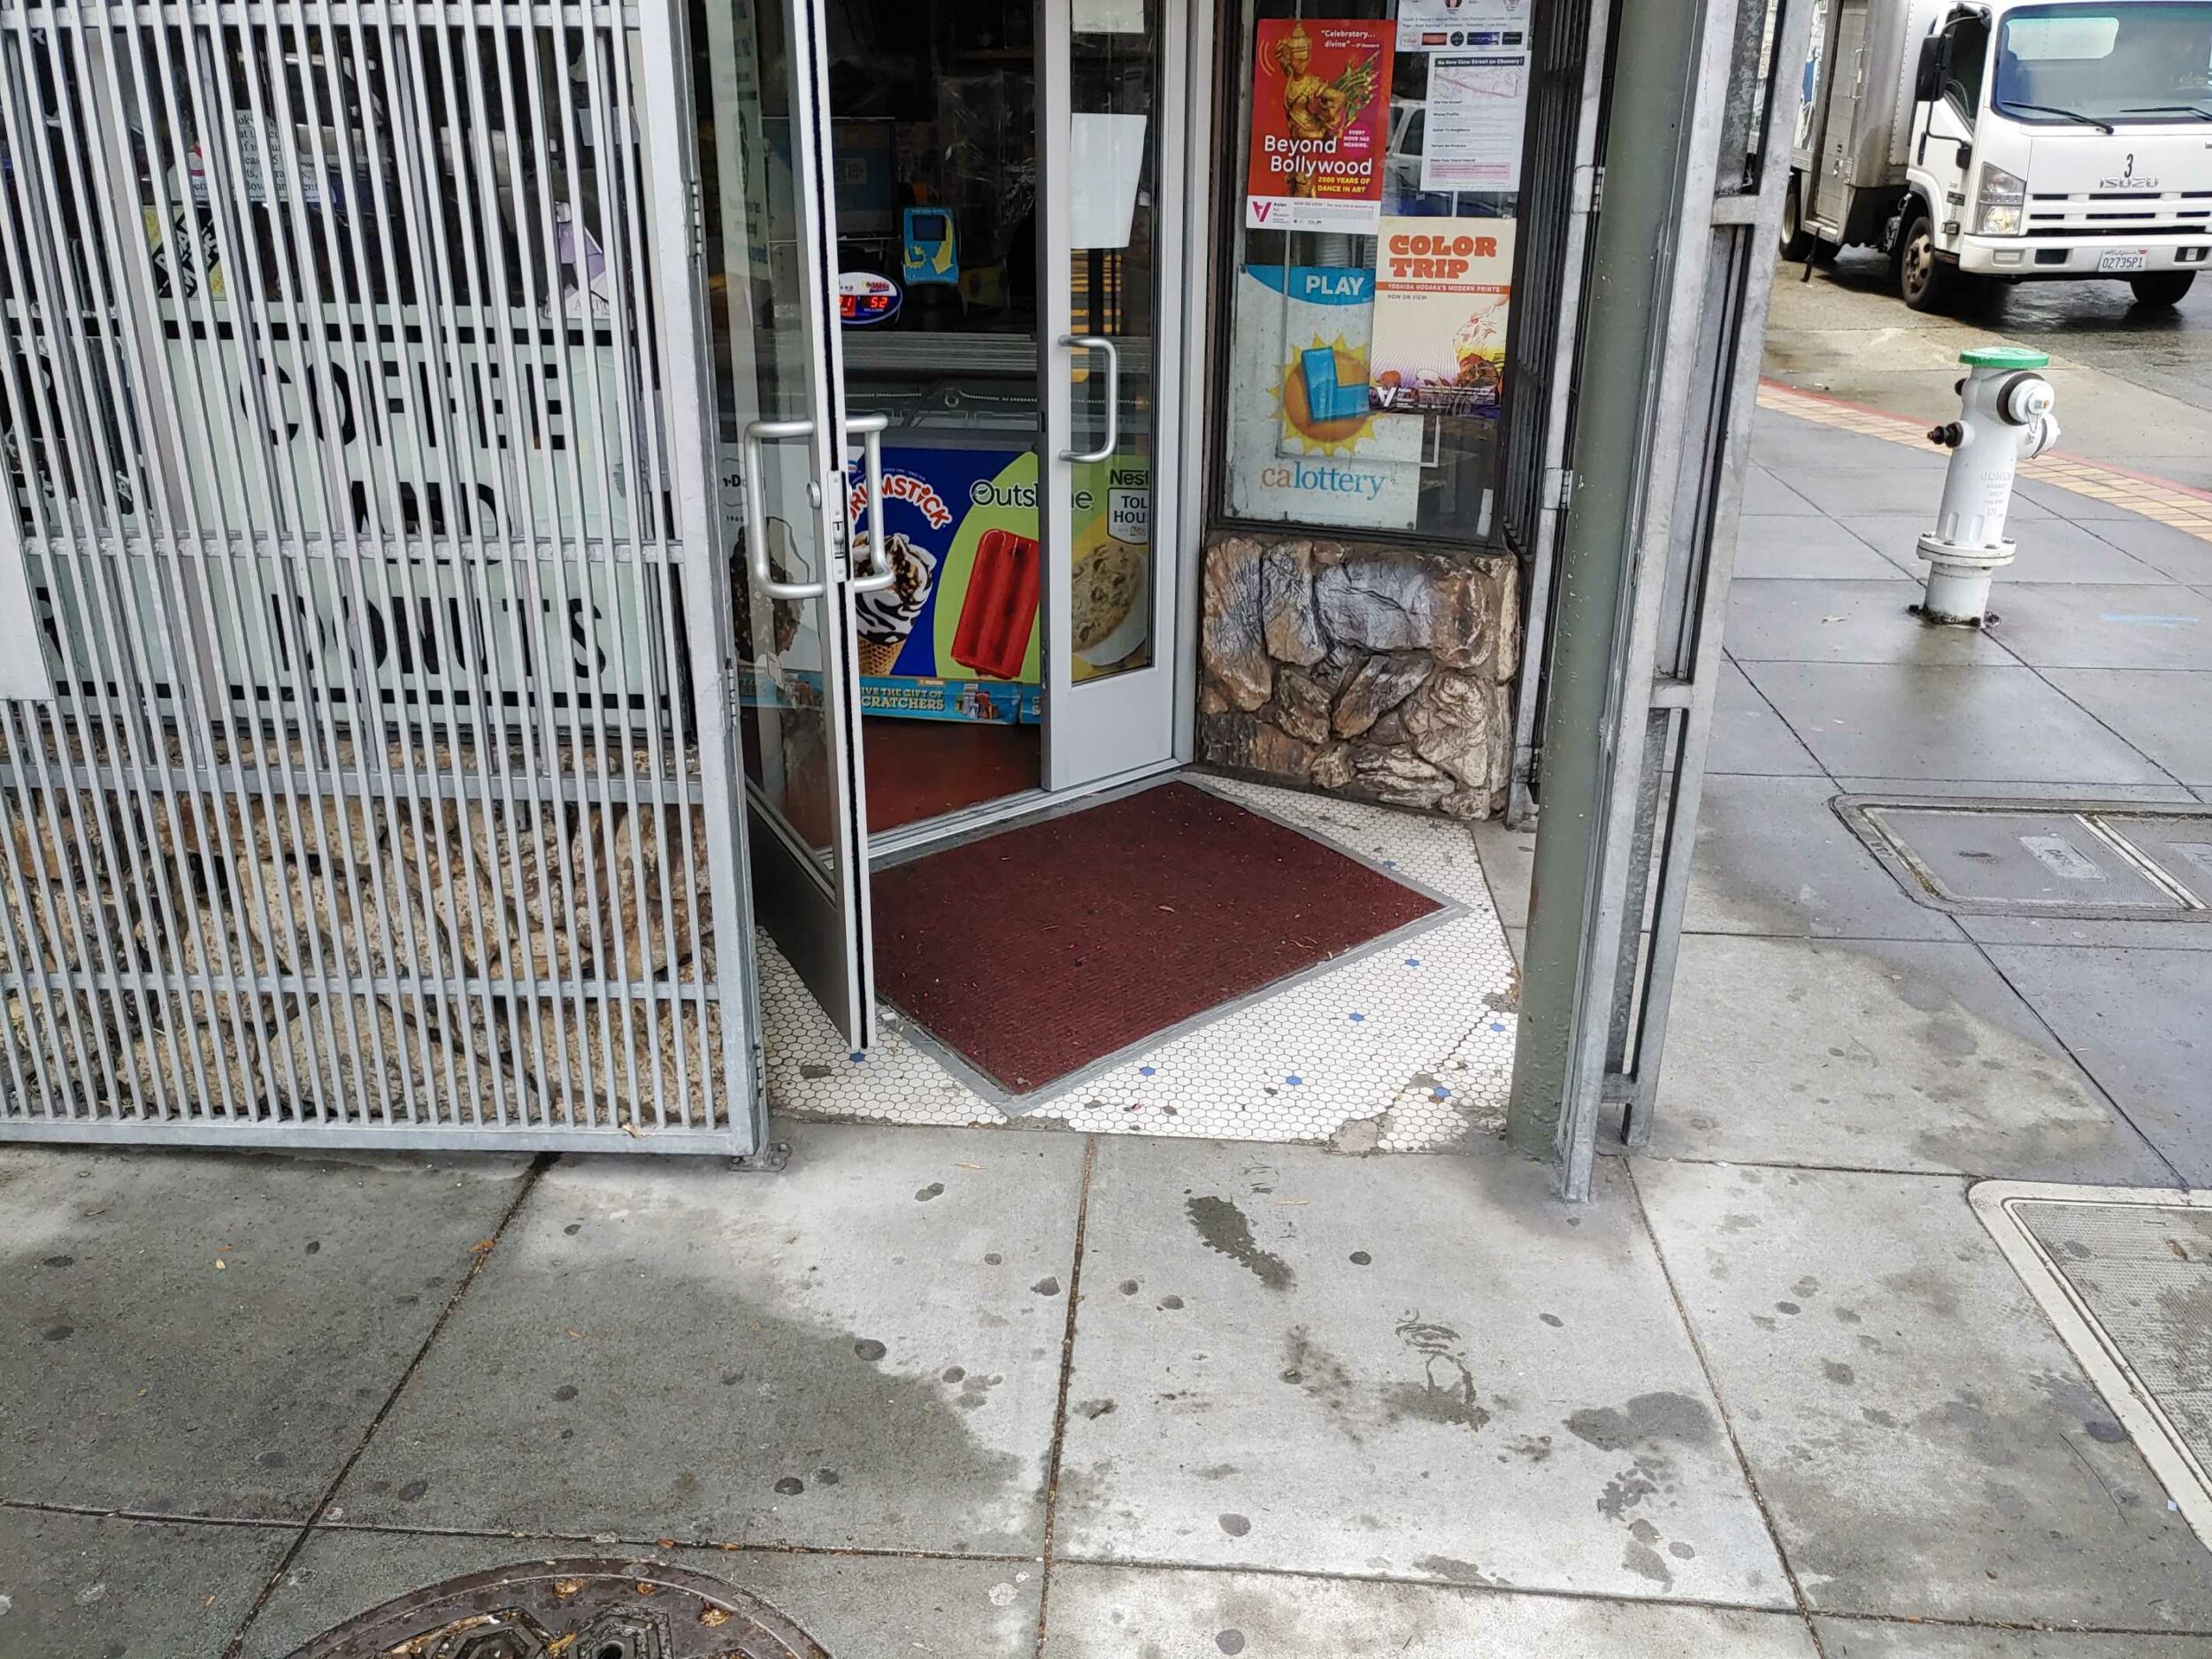 A sidewalk with a storefront; an open security gate reveals ads and a lottery sign on the door.